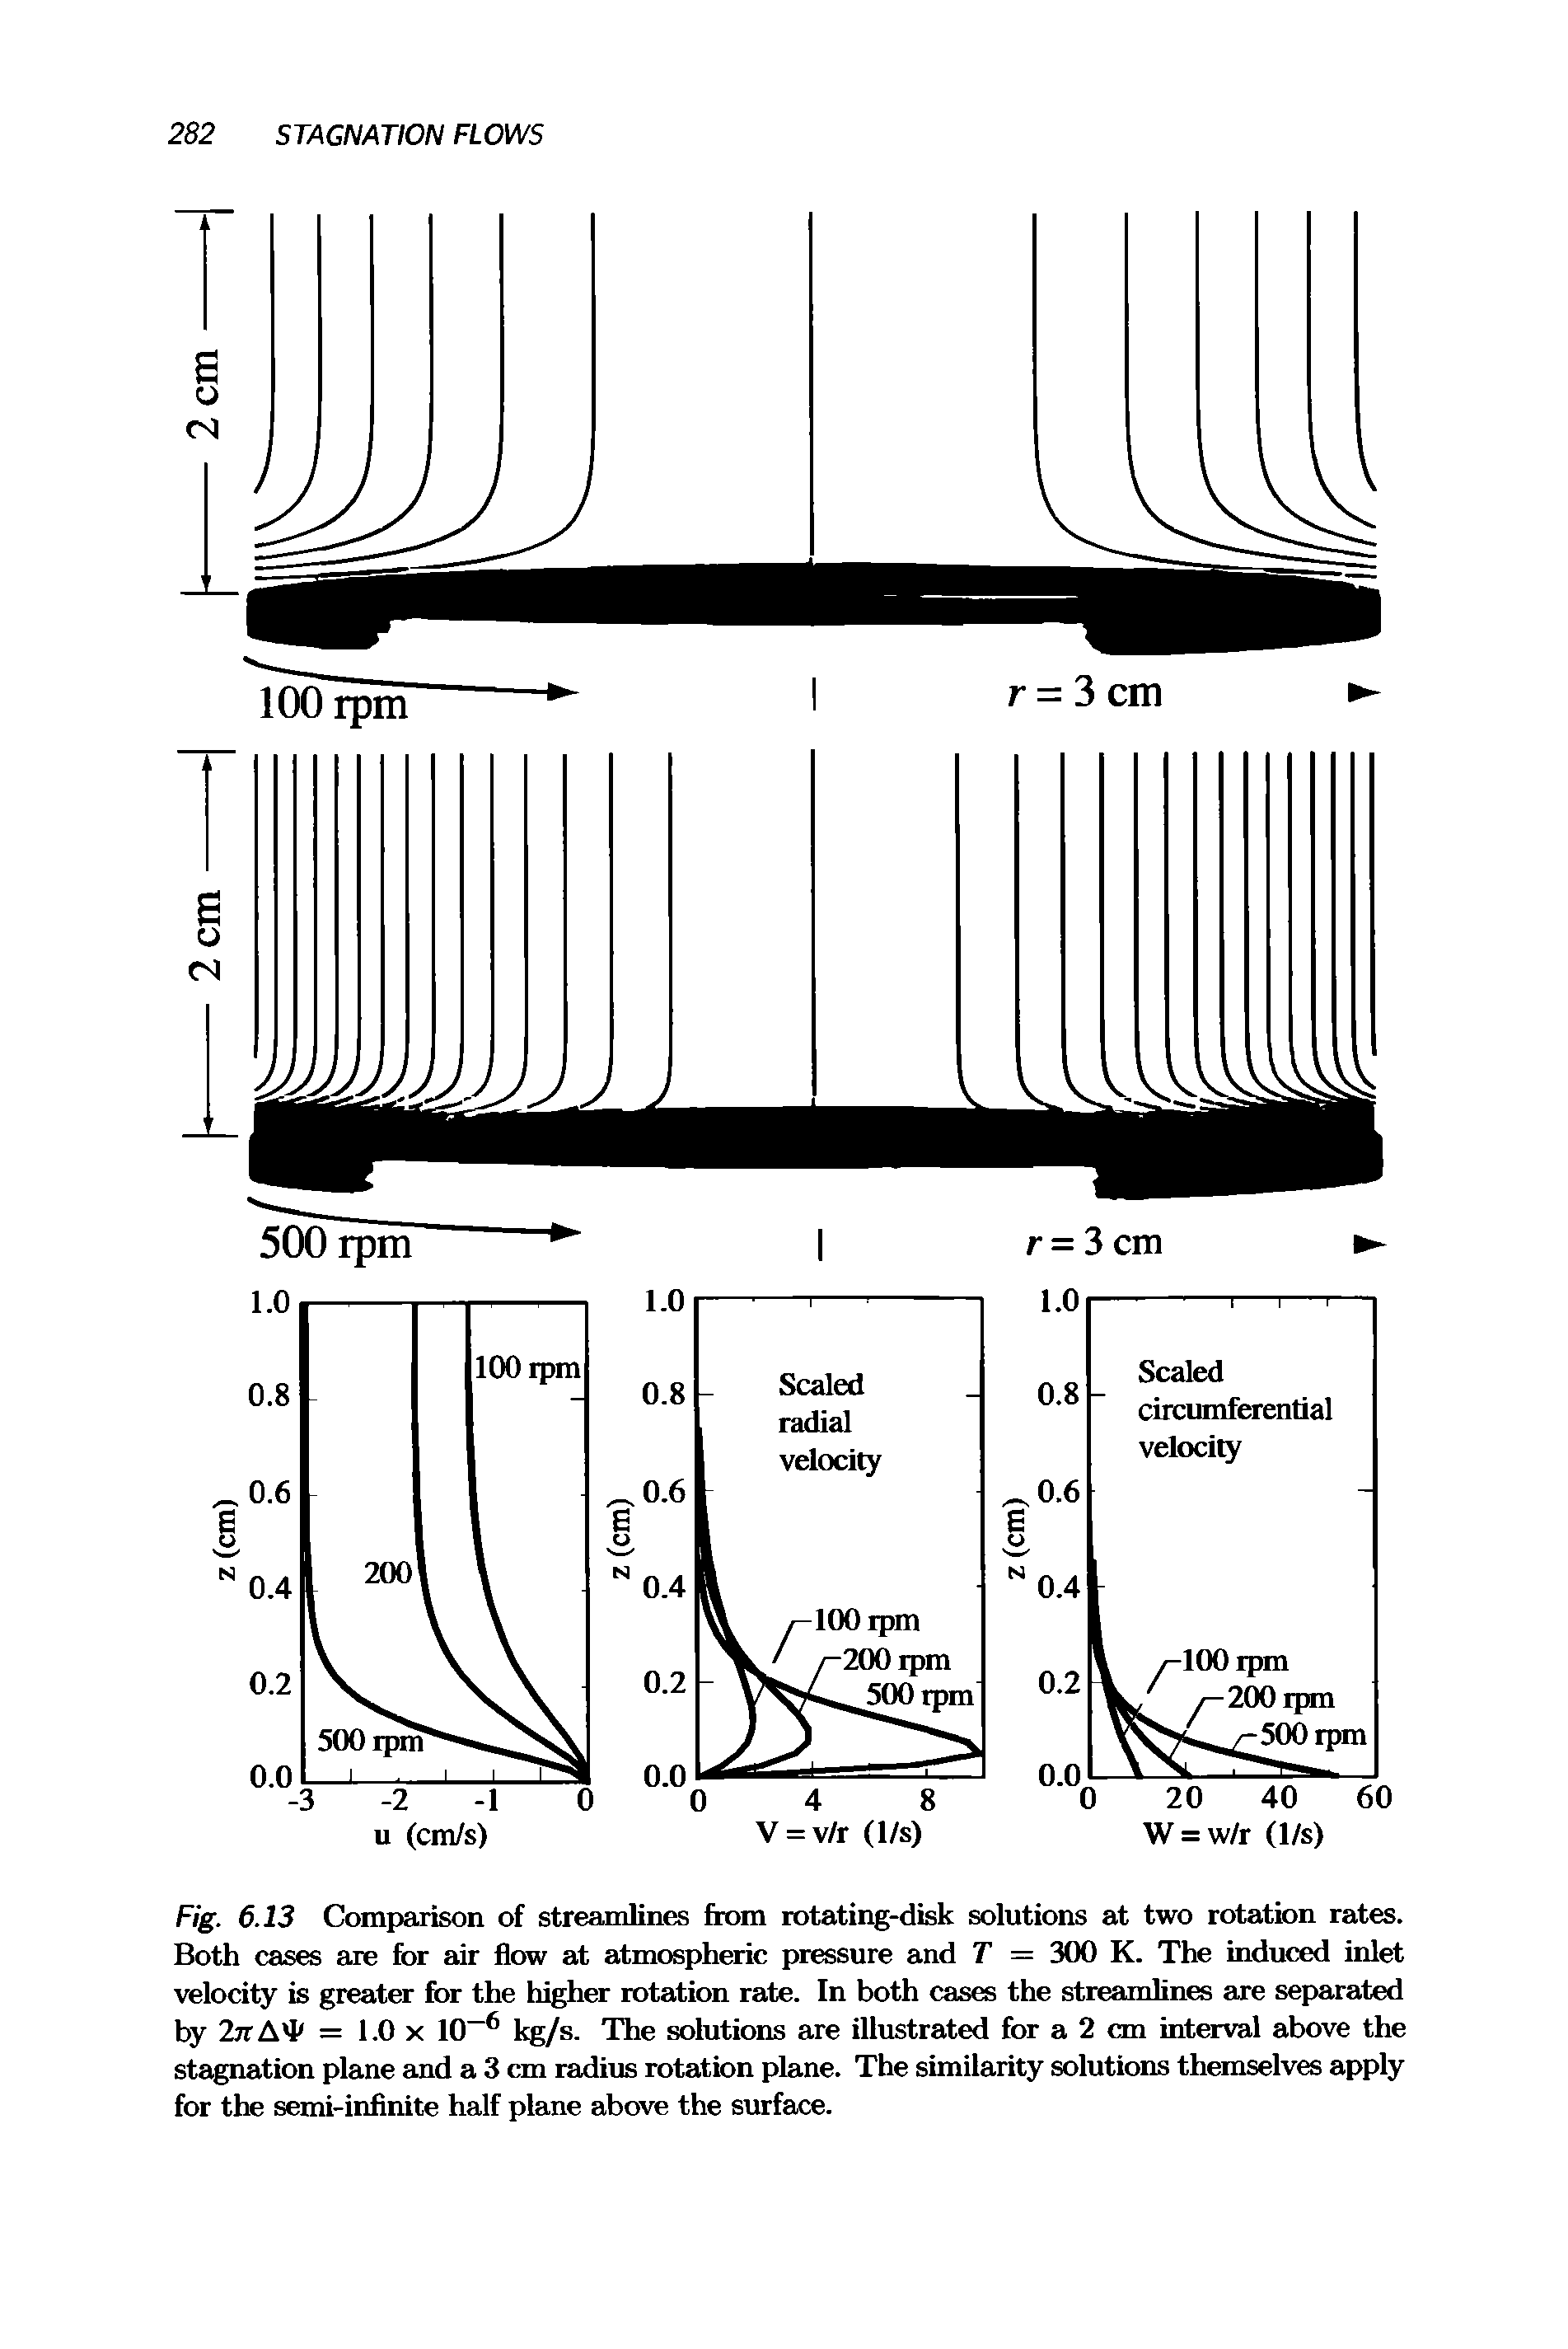 Fig. 6.13 Comparison of streamlines from rotating-disk solutions at two rotation rates. Both cases are for air flow at atmospheric pressure and T = 300 K. The induced inlet velocity is greater for the higher rotation rate. In both cases the streamlines axe separated by 27tA4< = 1.0 x 10-6 kg/s. The solutions are illustrated for a 2 cm interval above the stagnation plane and a 3 cm radius rotation plane. The similarity solutions themselves apply for the semi-infinite half plane above the surface.